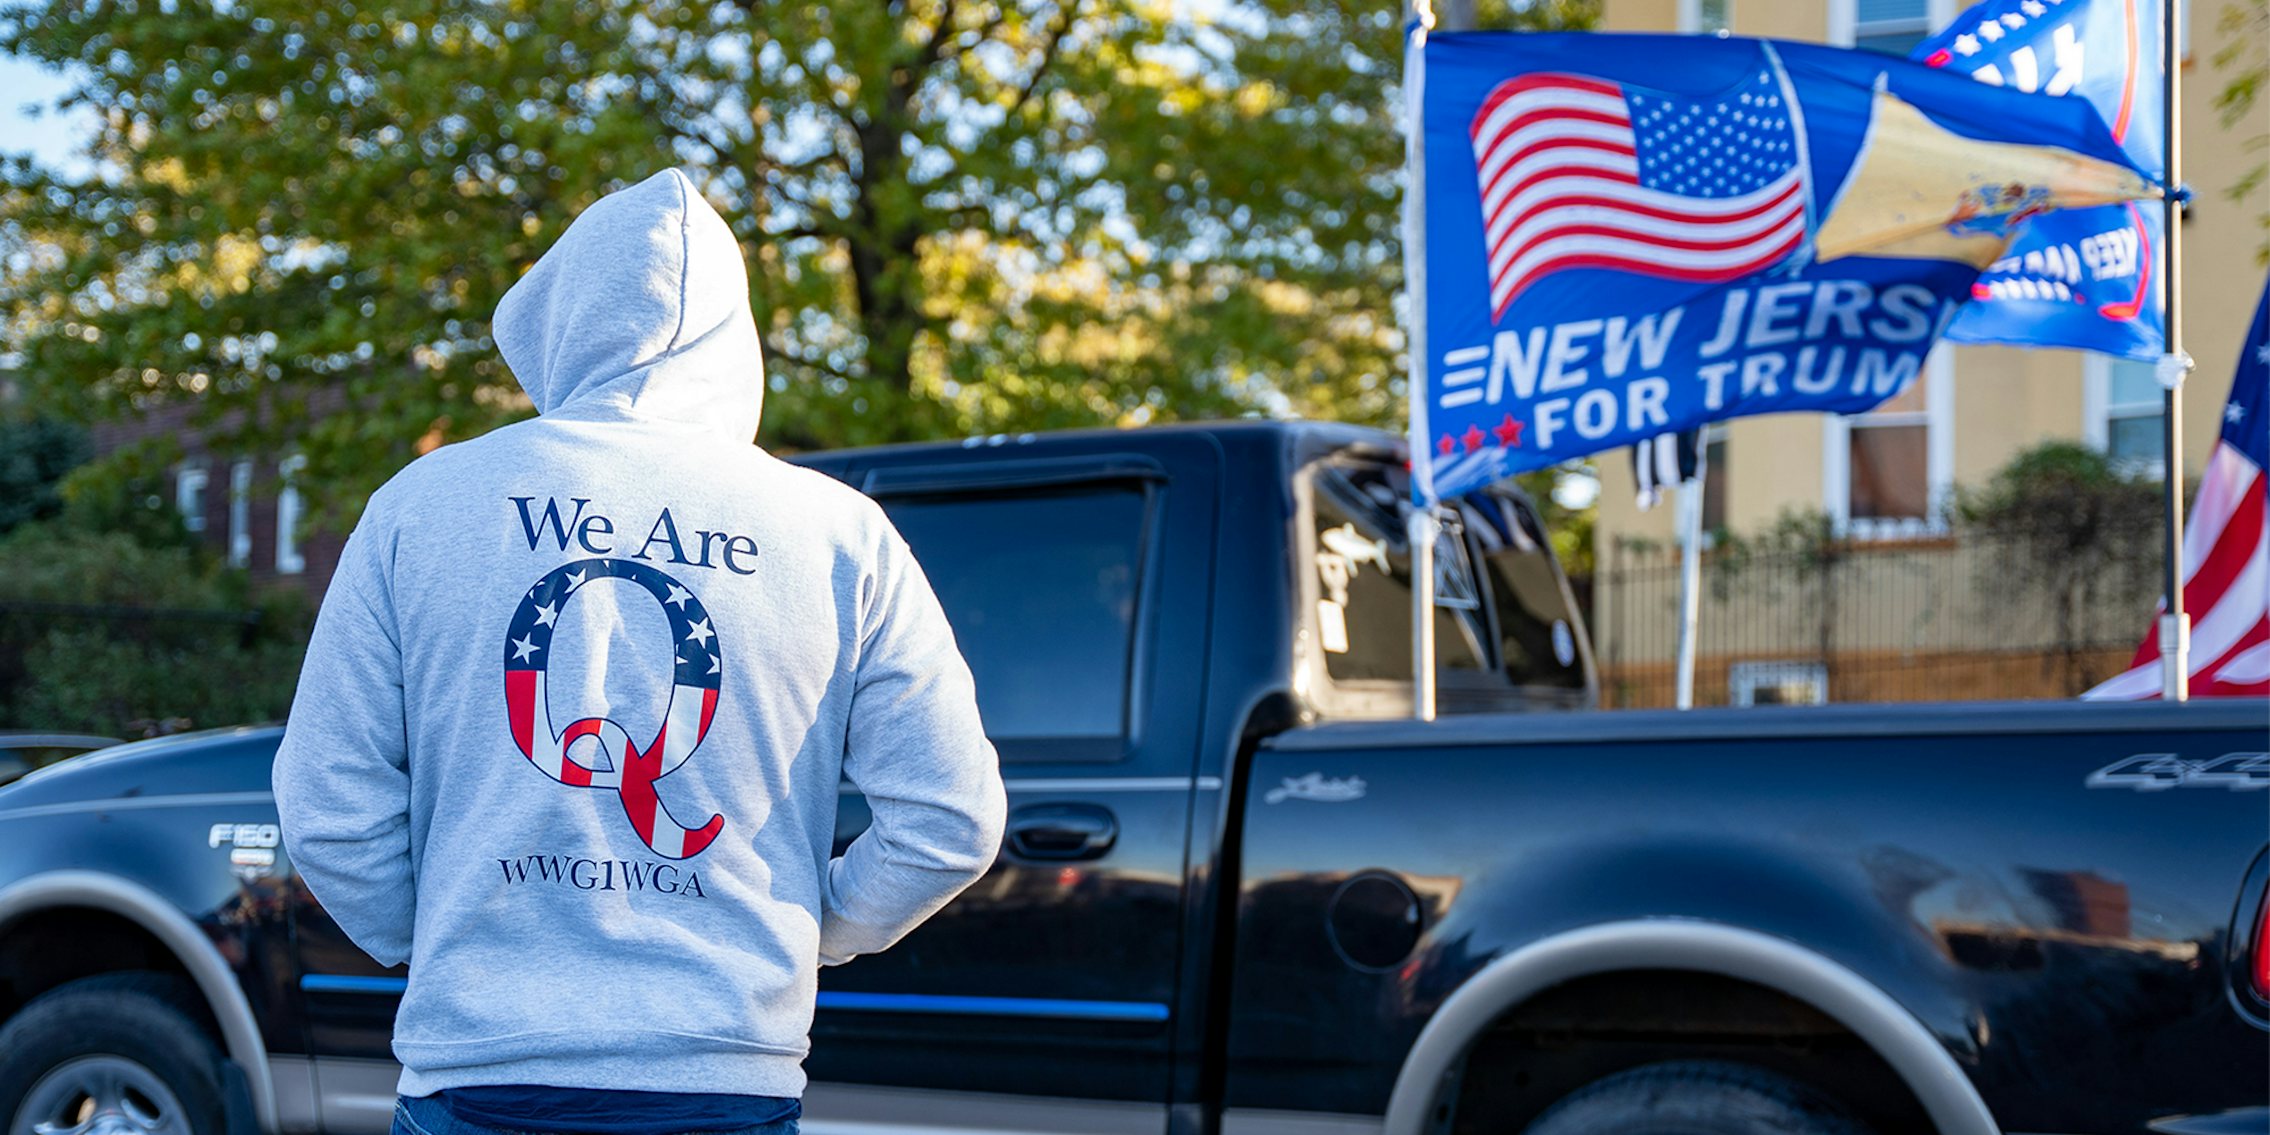 person wearing 'We Are Q WWG1WGA' hooded sweatshirt in front of truck with New Jersy For Trump flag